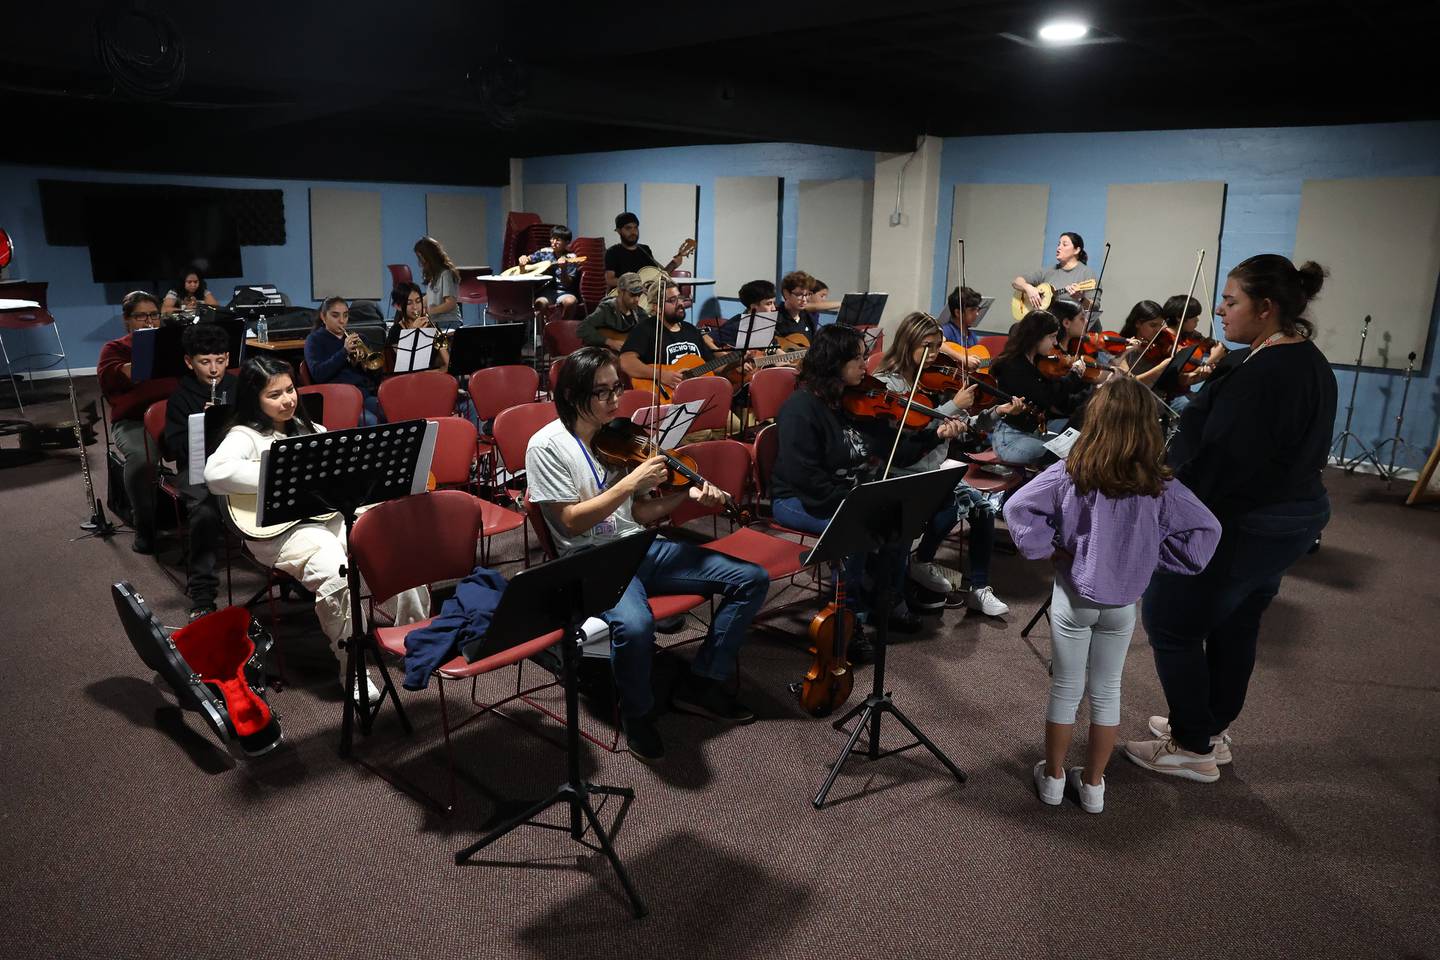 Mariachi de Joliet, a community Mariachi band, practices for an upcoming fundraiser performance at the Rialto Square Theatre in Joliet.